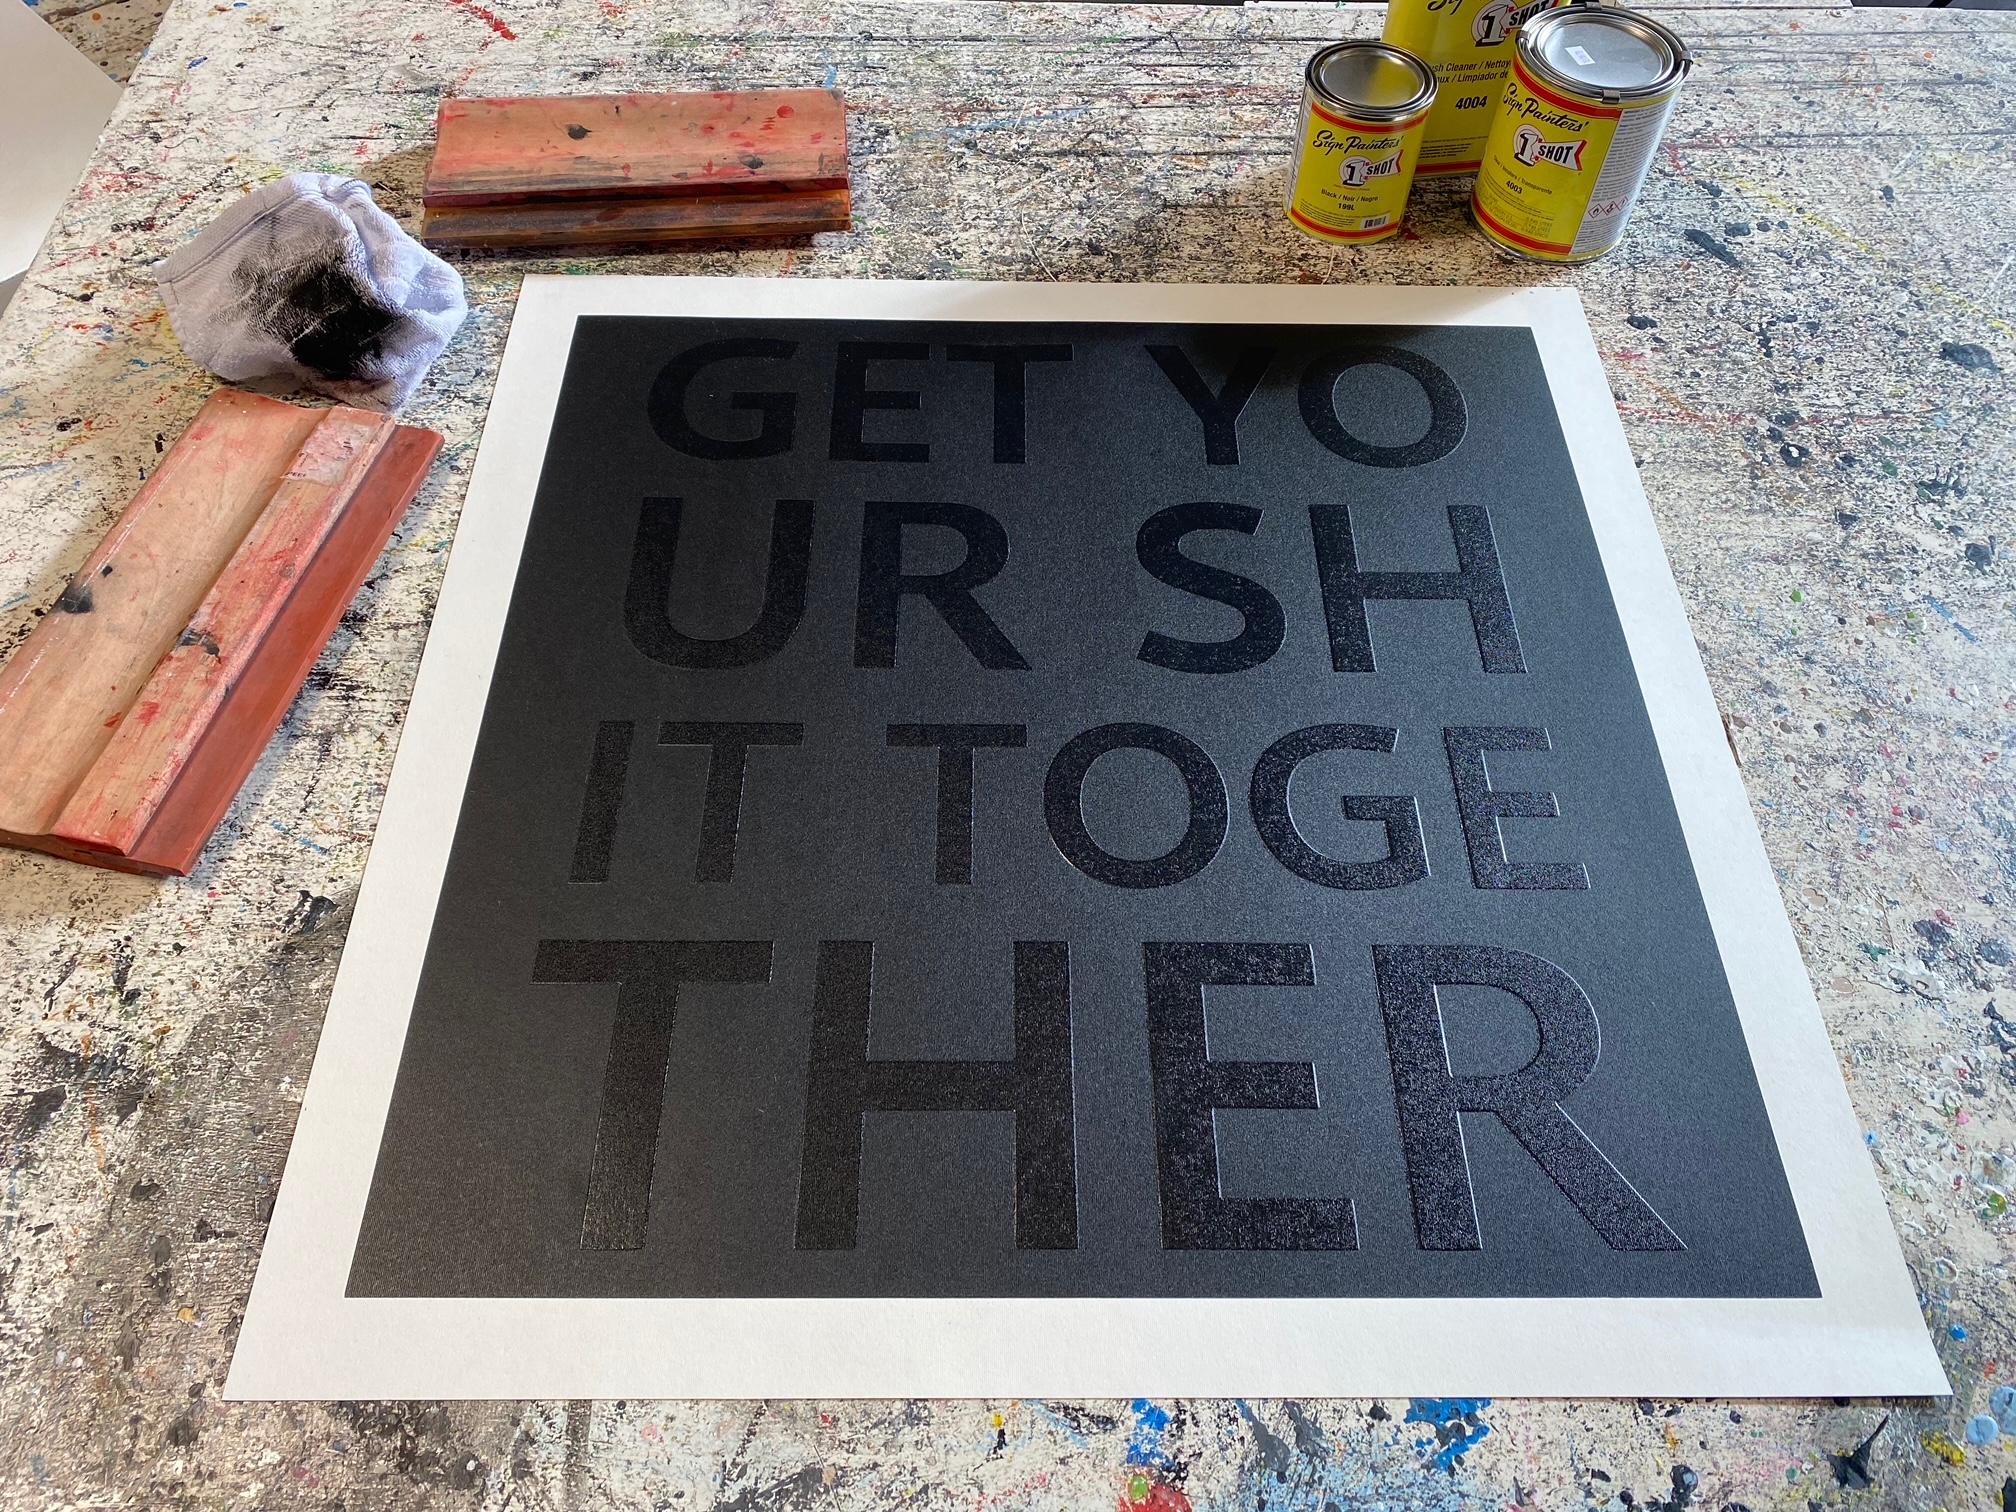 John O'Hara's famous 'Get Your Shit Together' painting is now a 2-color embossed serigraph on recycled archival hemp paper. Hand signed by the artist.

This work is unframed.

Forsyth is proud to be the exclusive gallery of John O'Hara